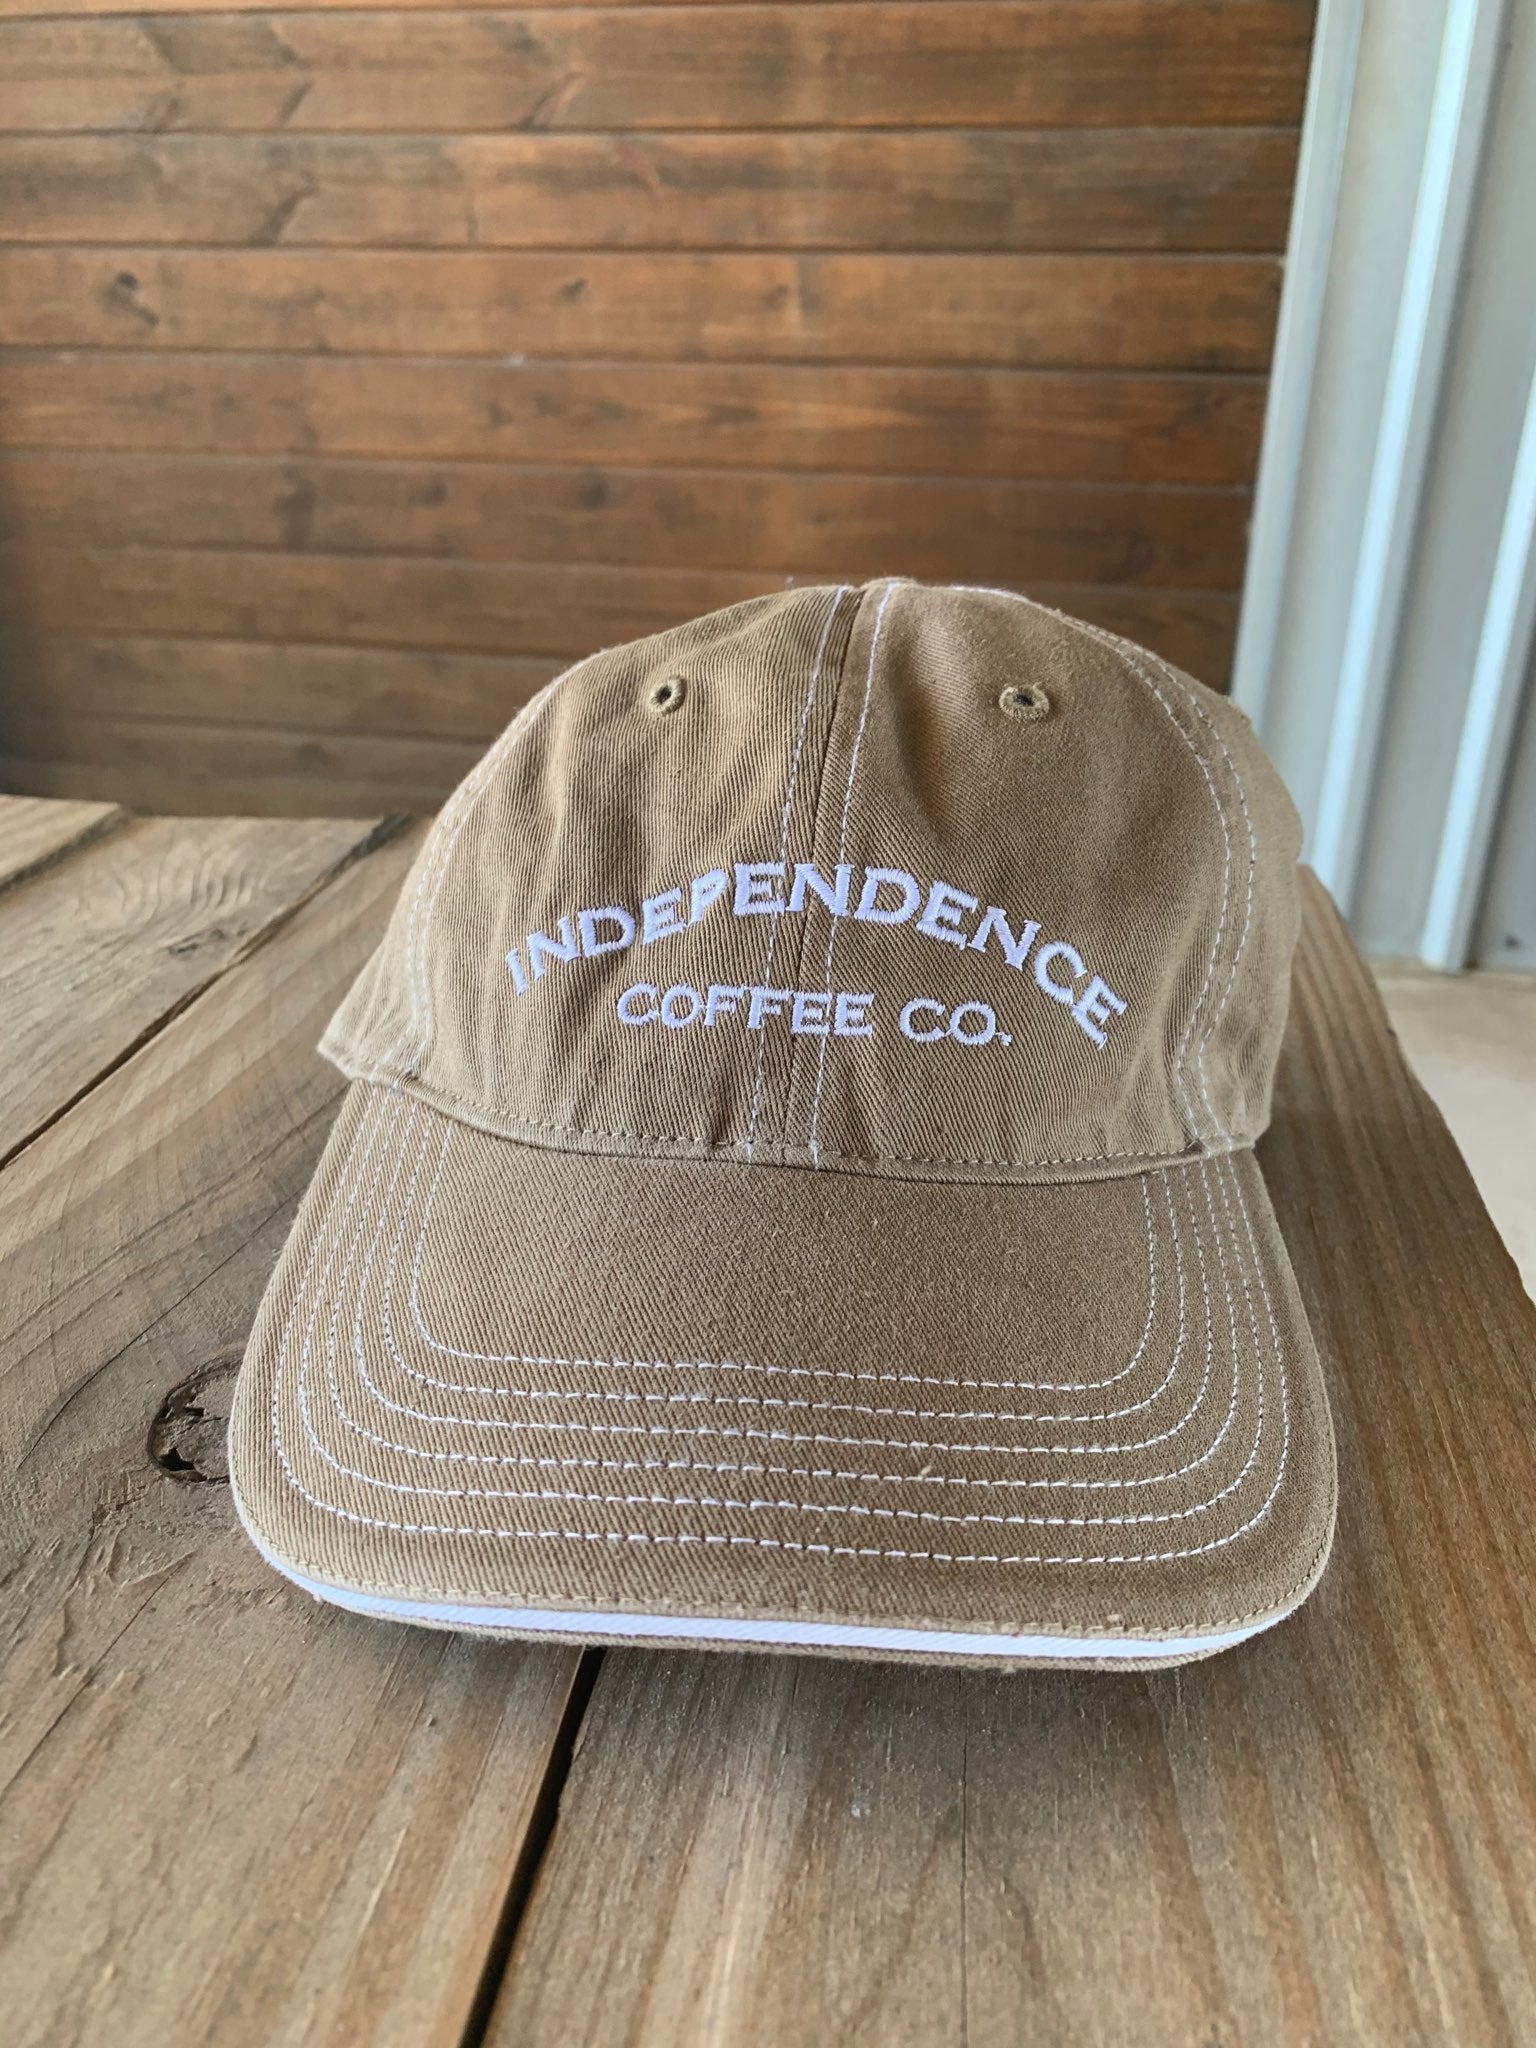 Merch - Independence Coffee Co.